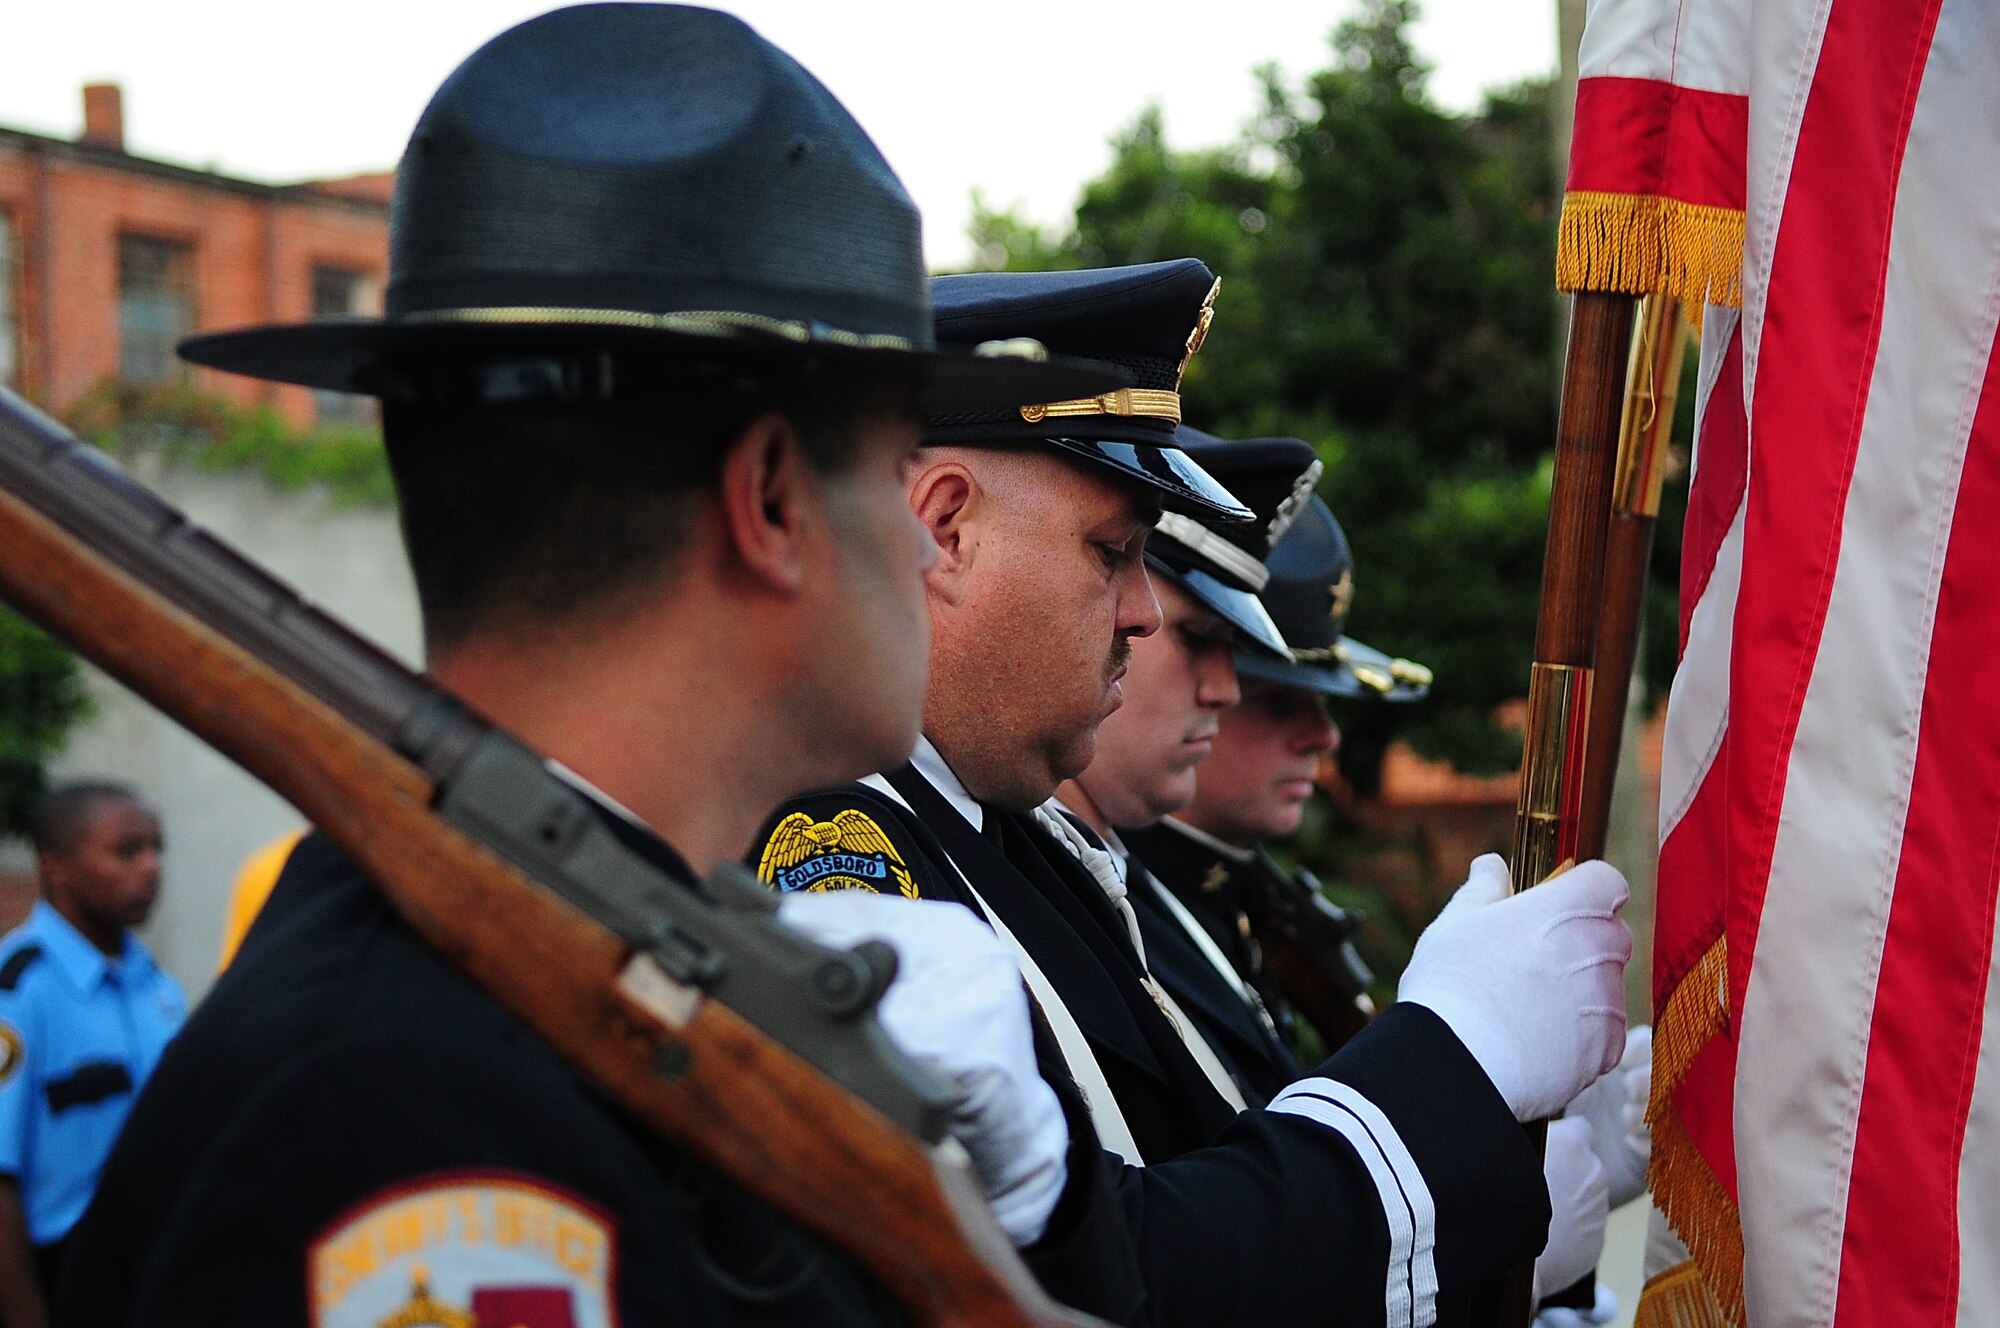 The Goldsboro Police Department color guard practices posting the colors before the Blue Ribbon Jam on Center Street in Goldsboro, N.C., Oct. 1, 2009. The color guard is comprised of four men from the department who have strong discipline. (U.S. Air Force photo/Airman 1st Class Rae Perry)